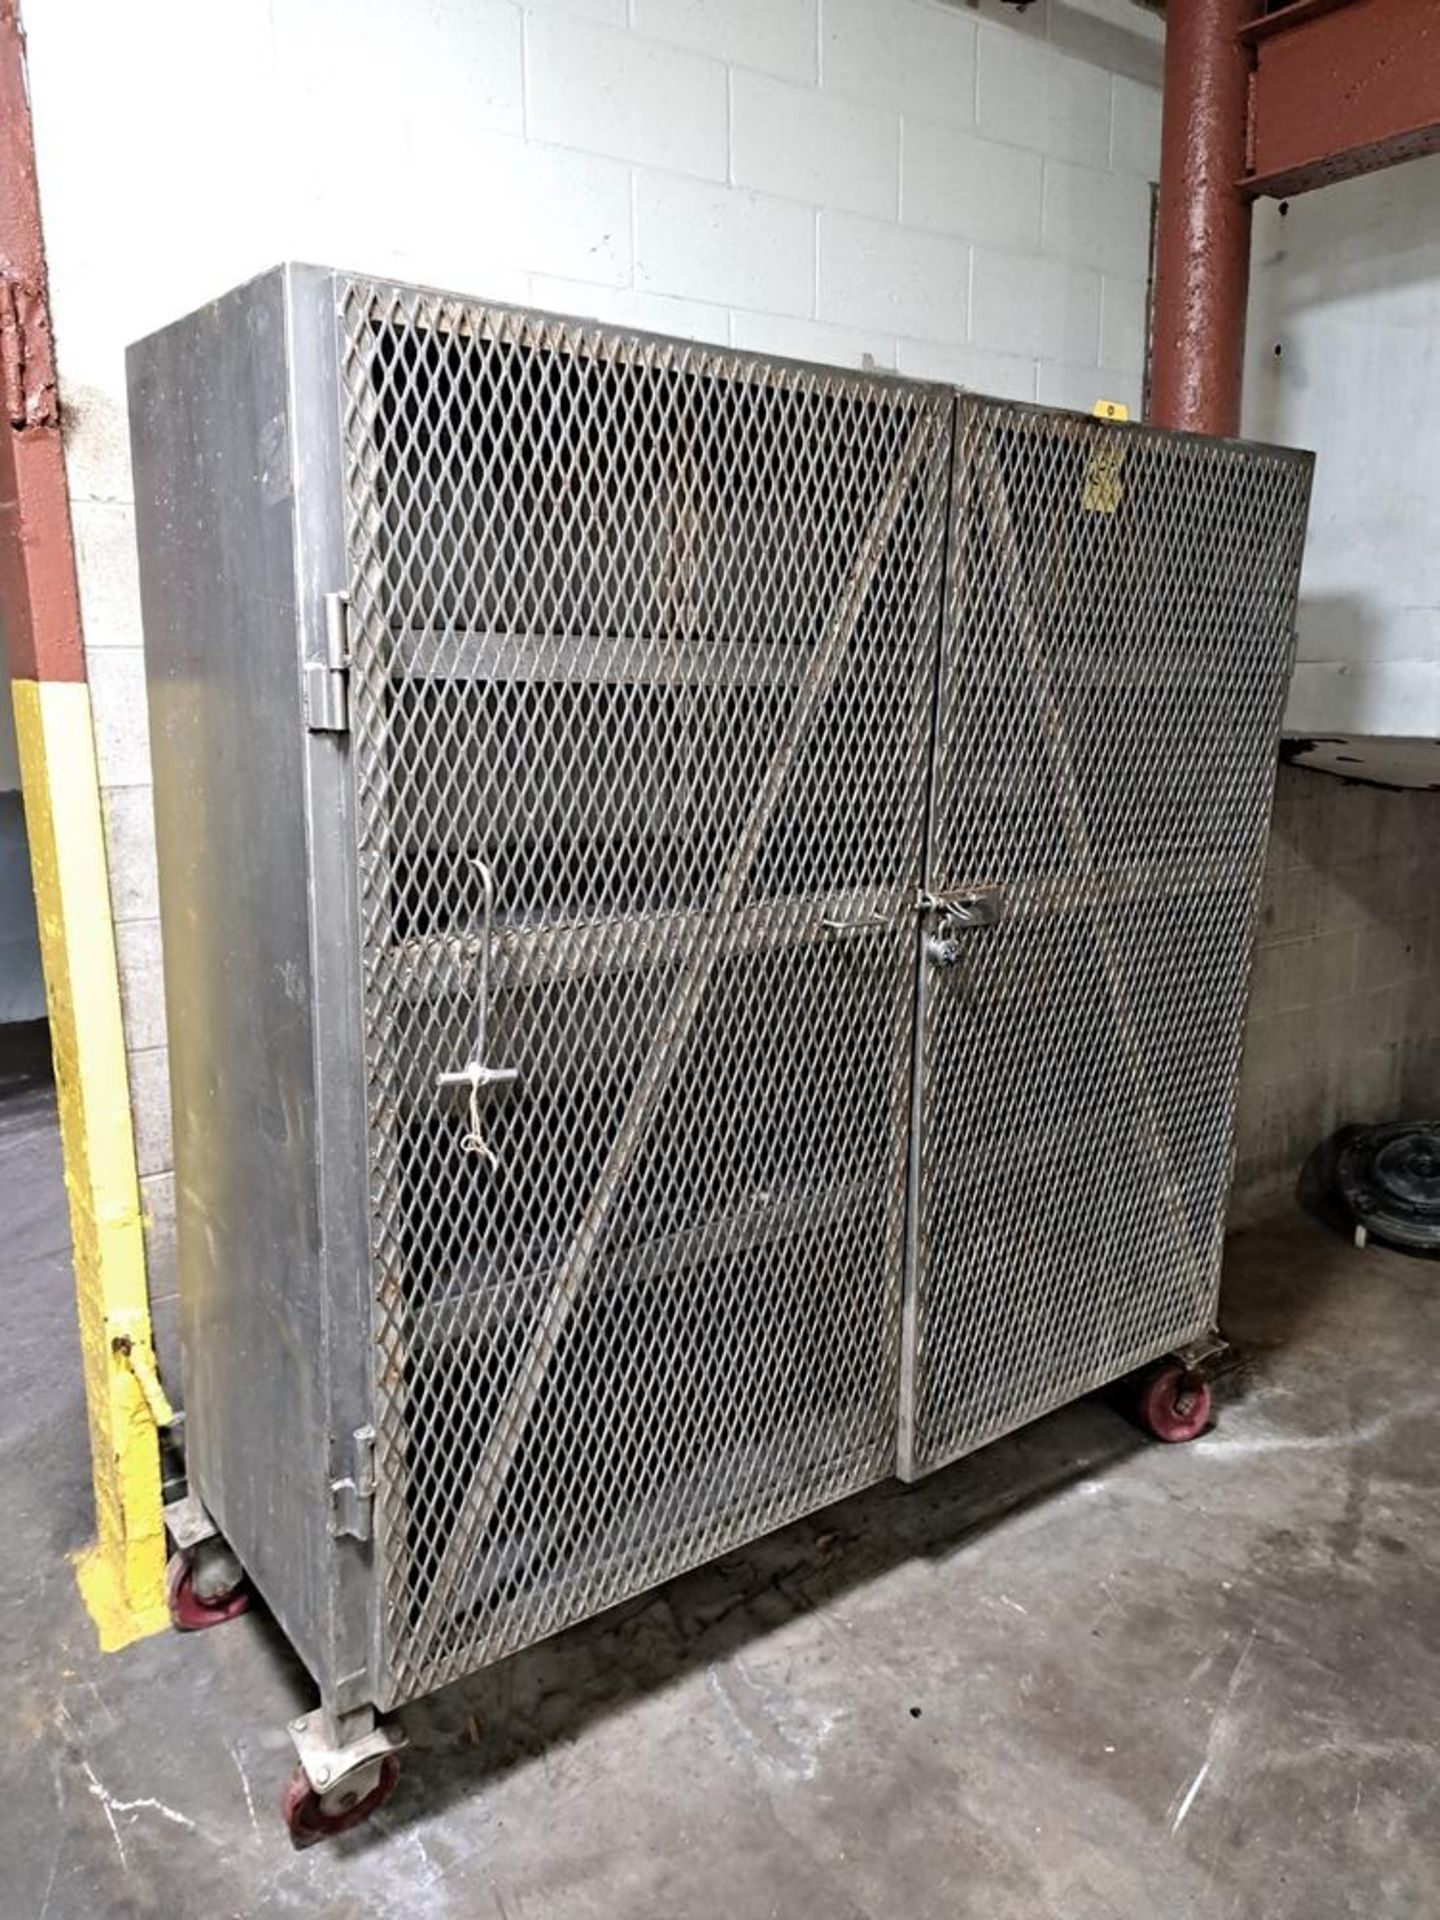 Stainless Steel Portable Cabinet, 6' L X 2' D X 77" T: Required Loading Fee $250.00, Rigger-Norm